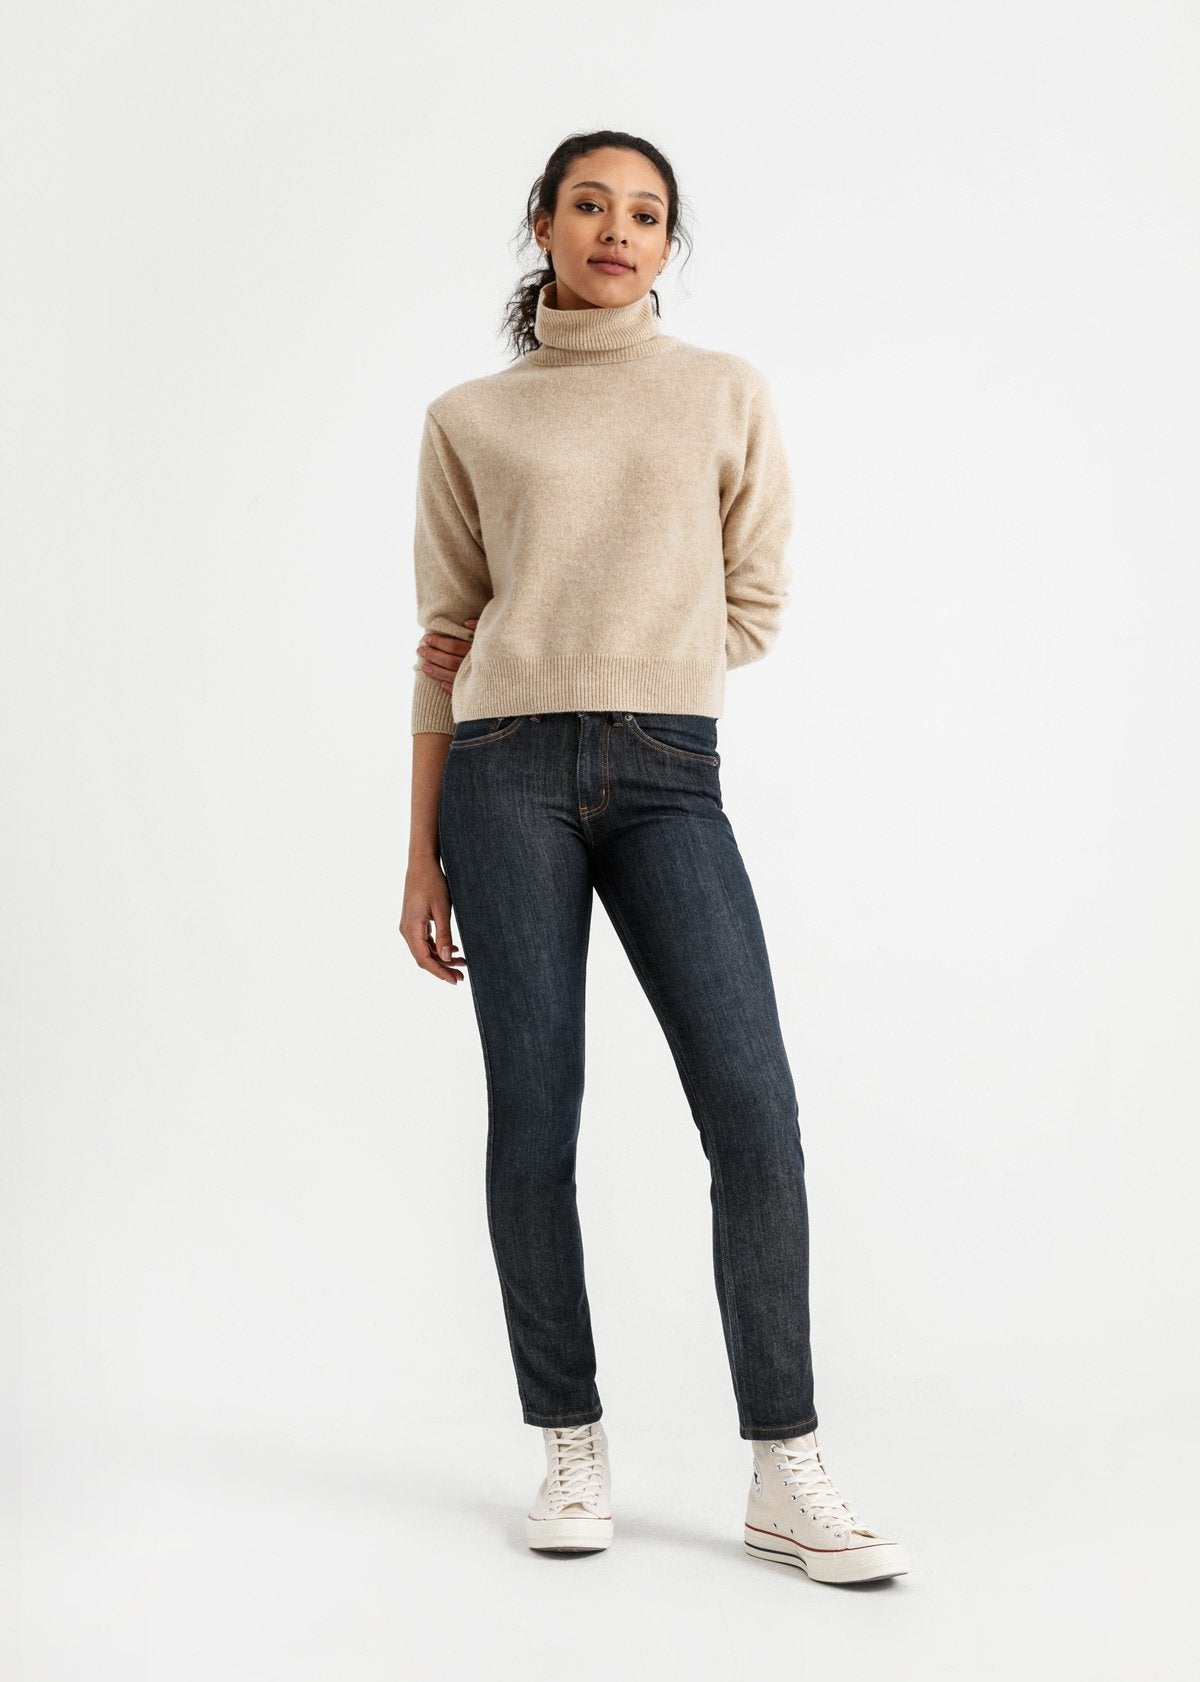 Warmest Jeans for Winter, Found: Find 6 Lined Pairs Here